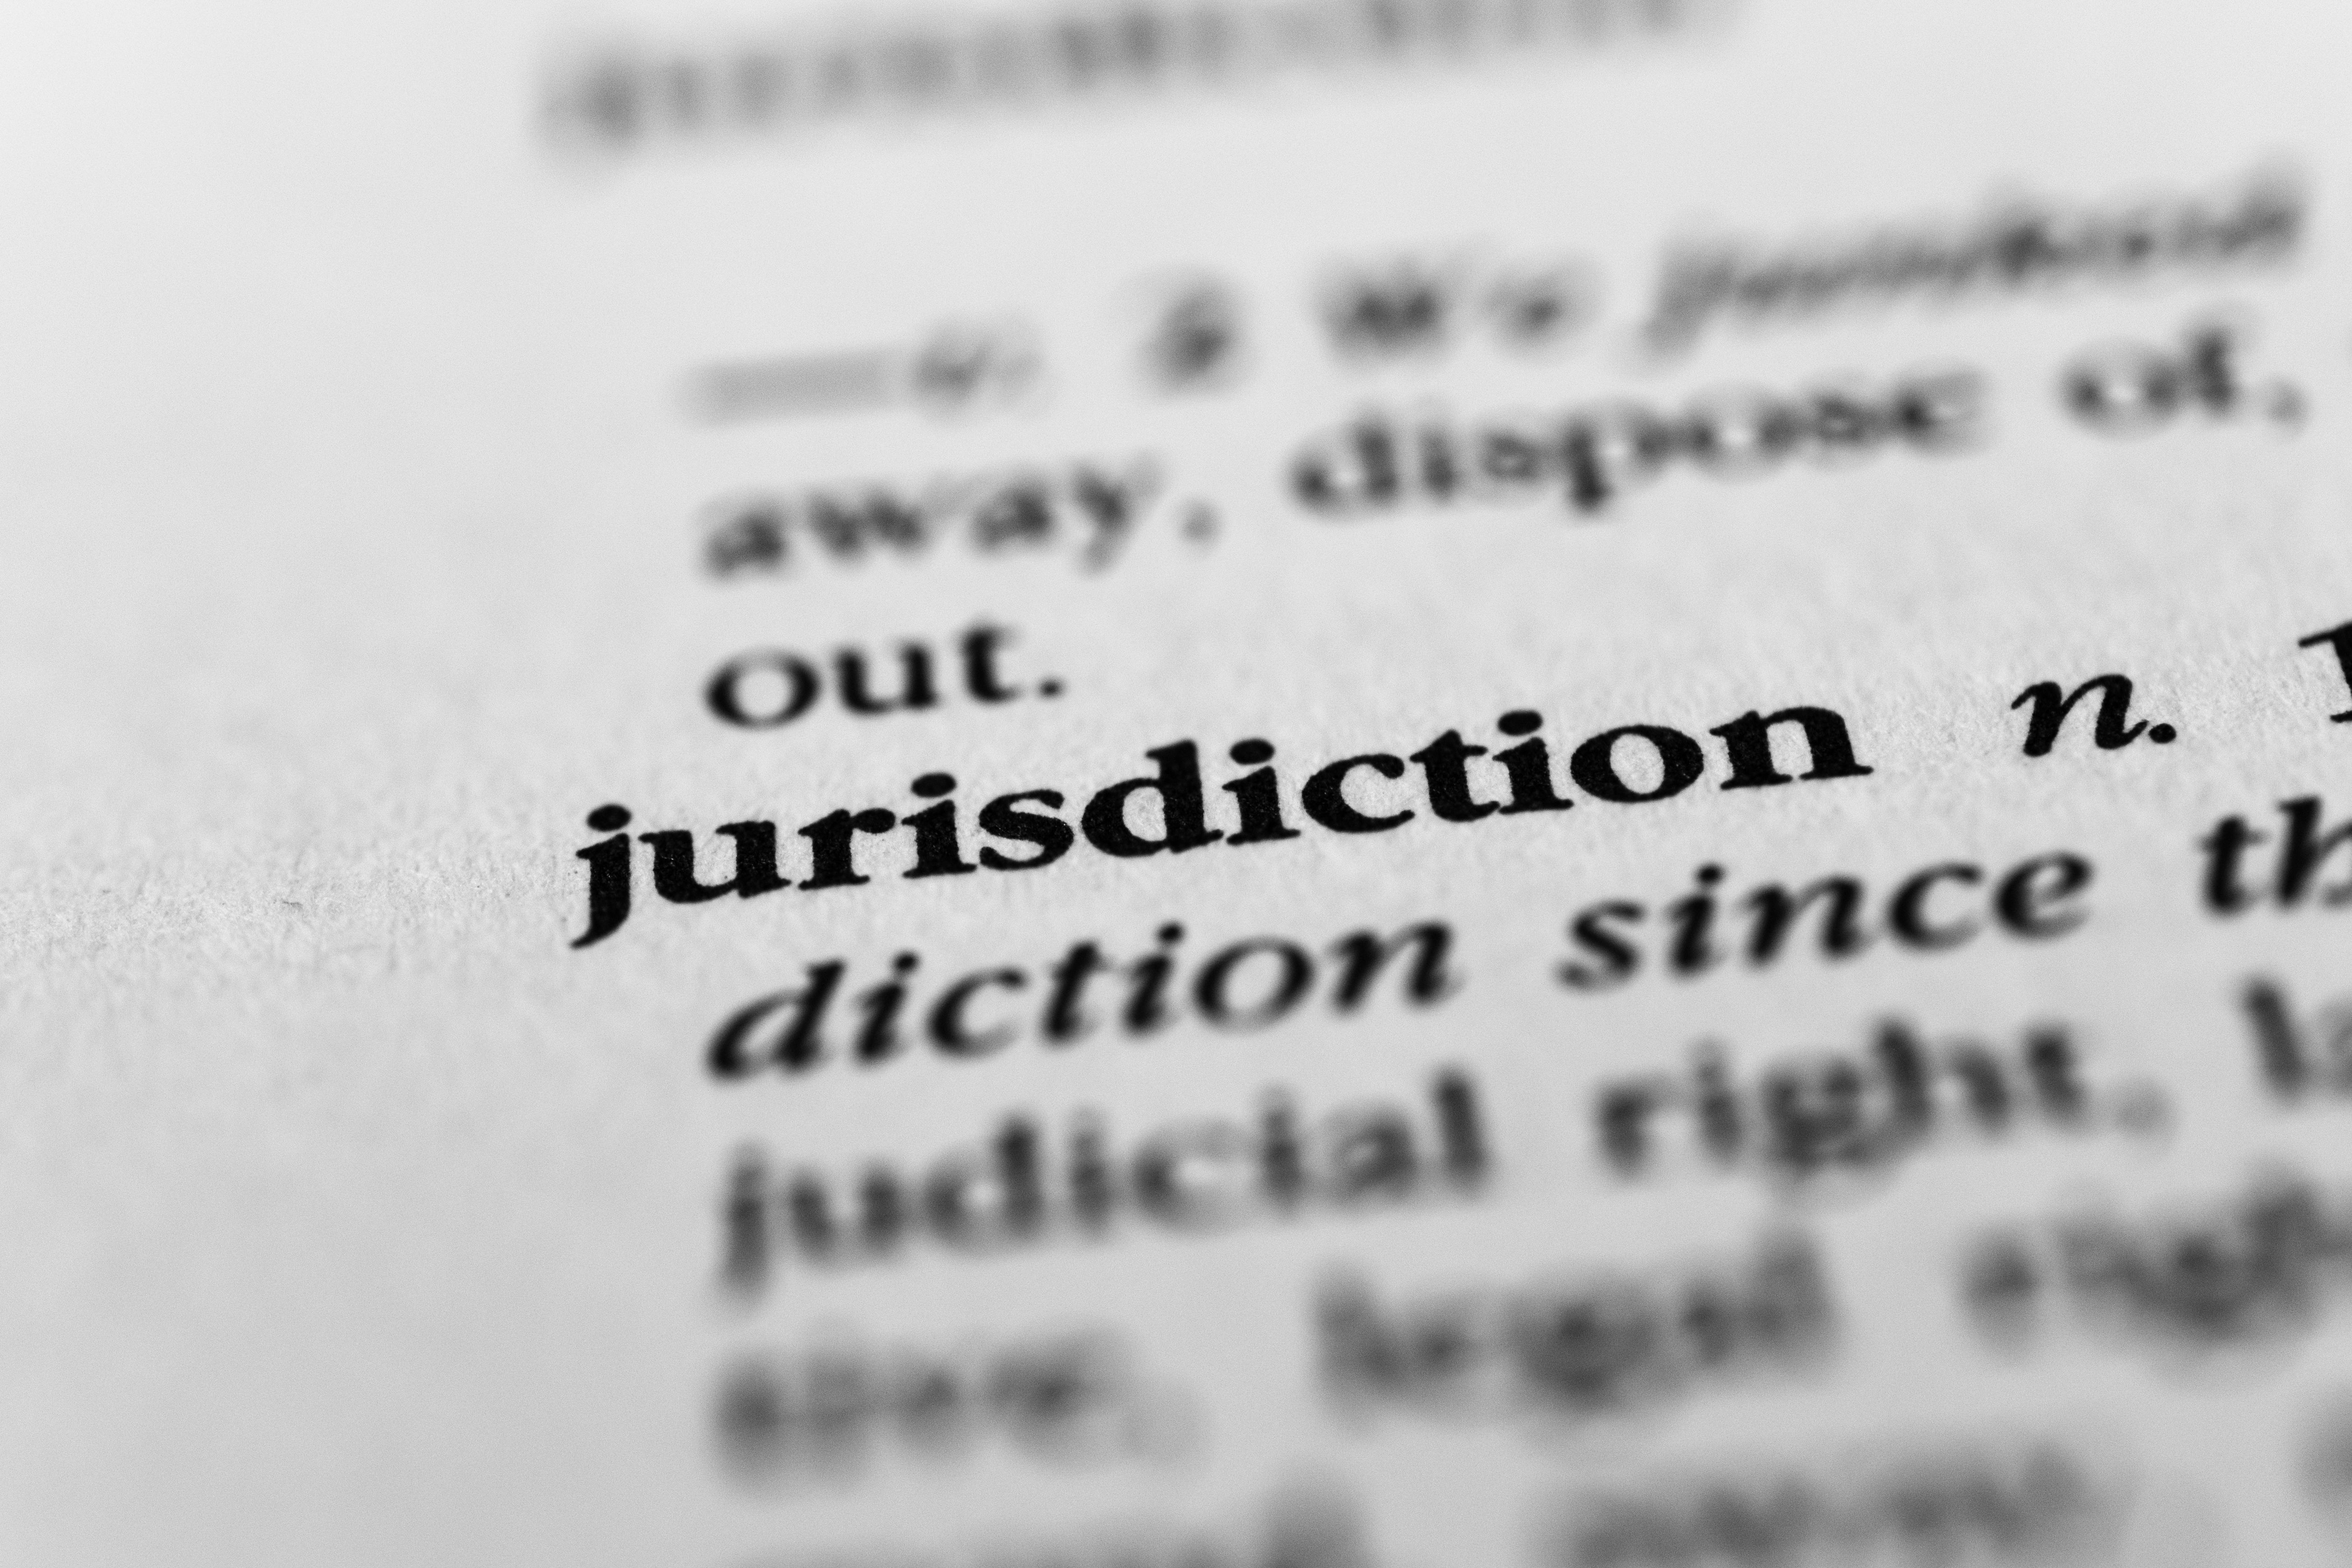 Jurisdiction of the Board in Determining Exemptions - Part 2